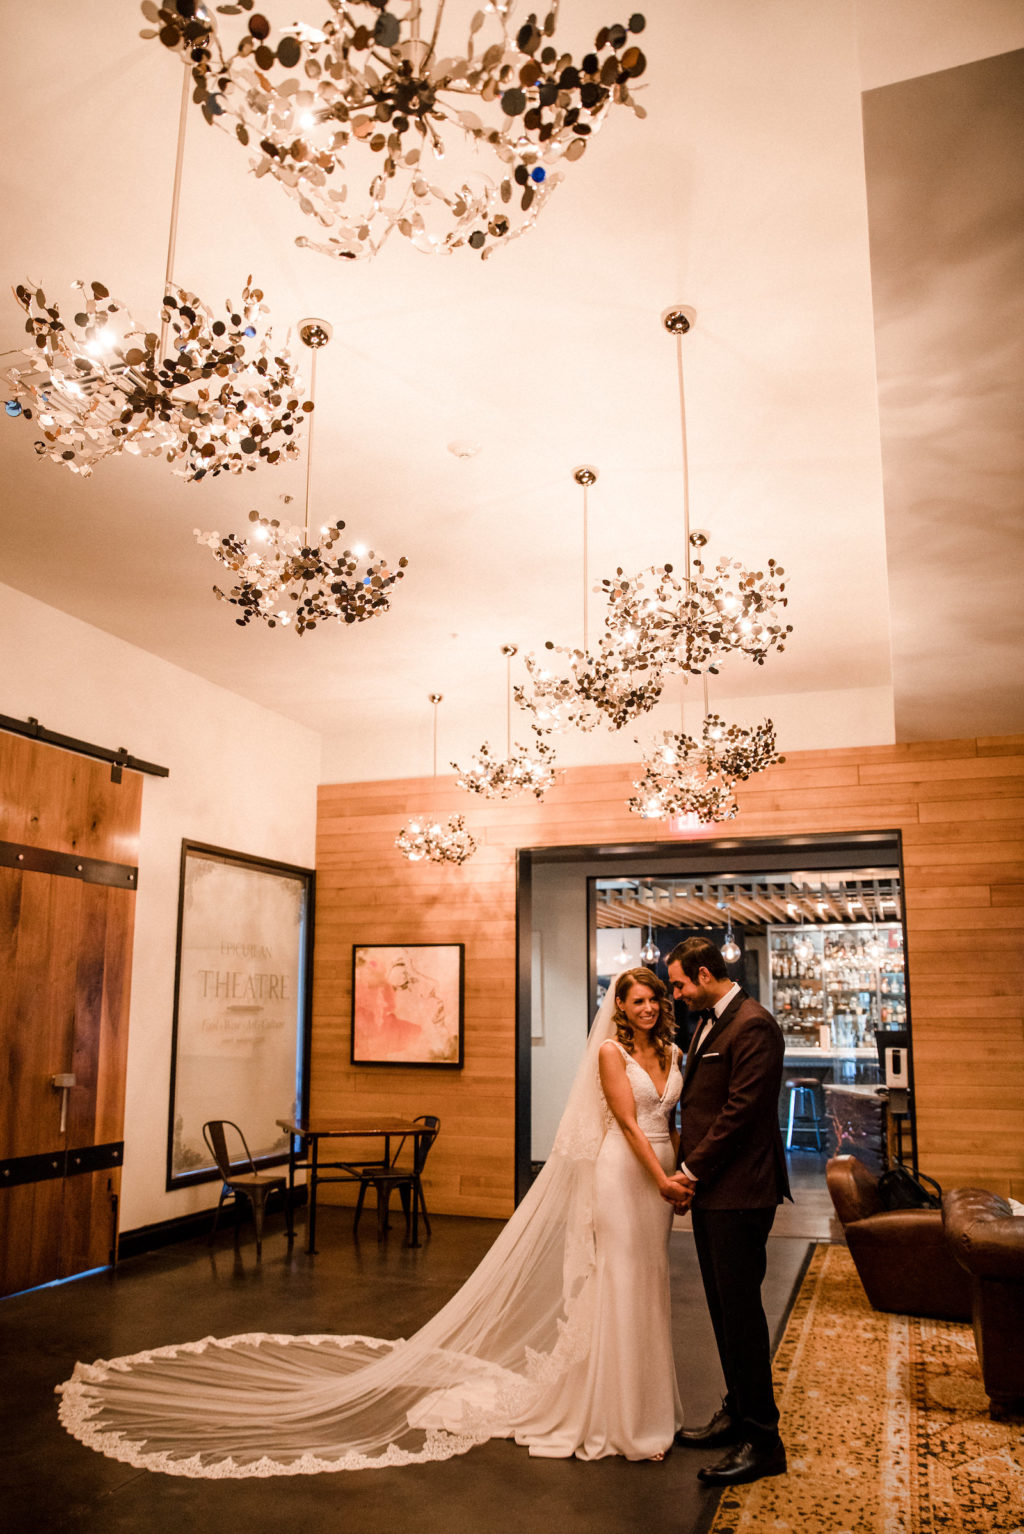 Timeless Tampa Bride in Full Length Lace Trim Veil and Groom in Lobby of Wedding Venue Epicurean Hotel | Elegant Affairs by Design